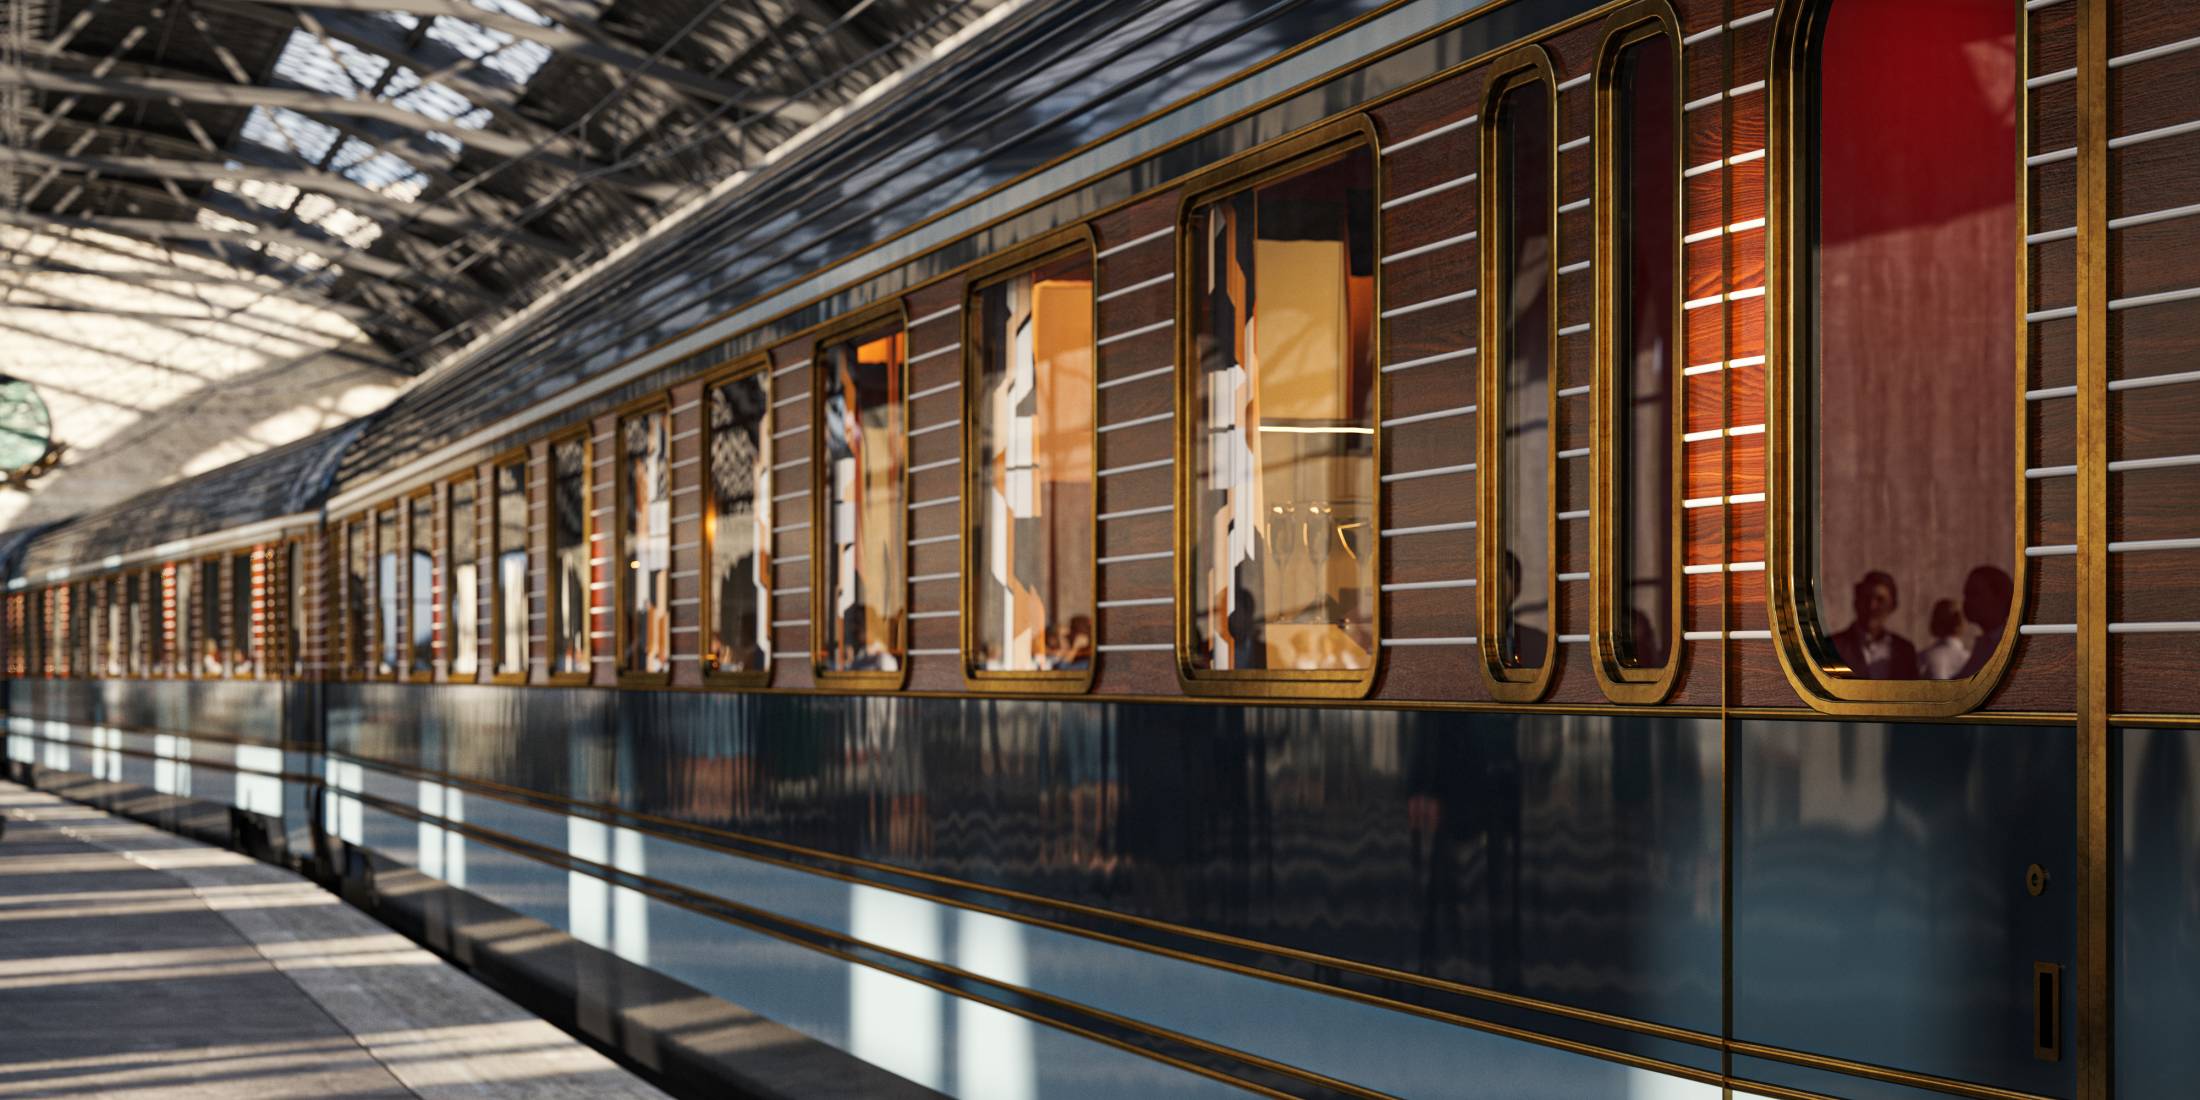 How to Travel on the Orient Express